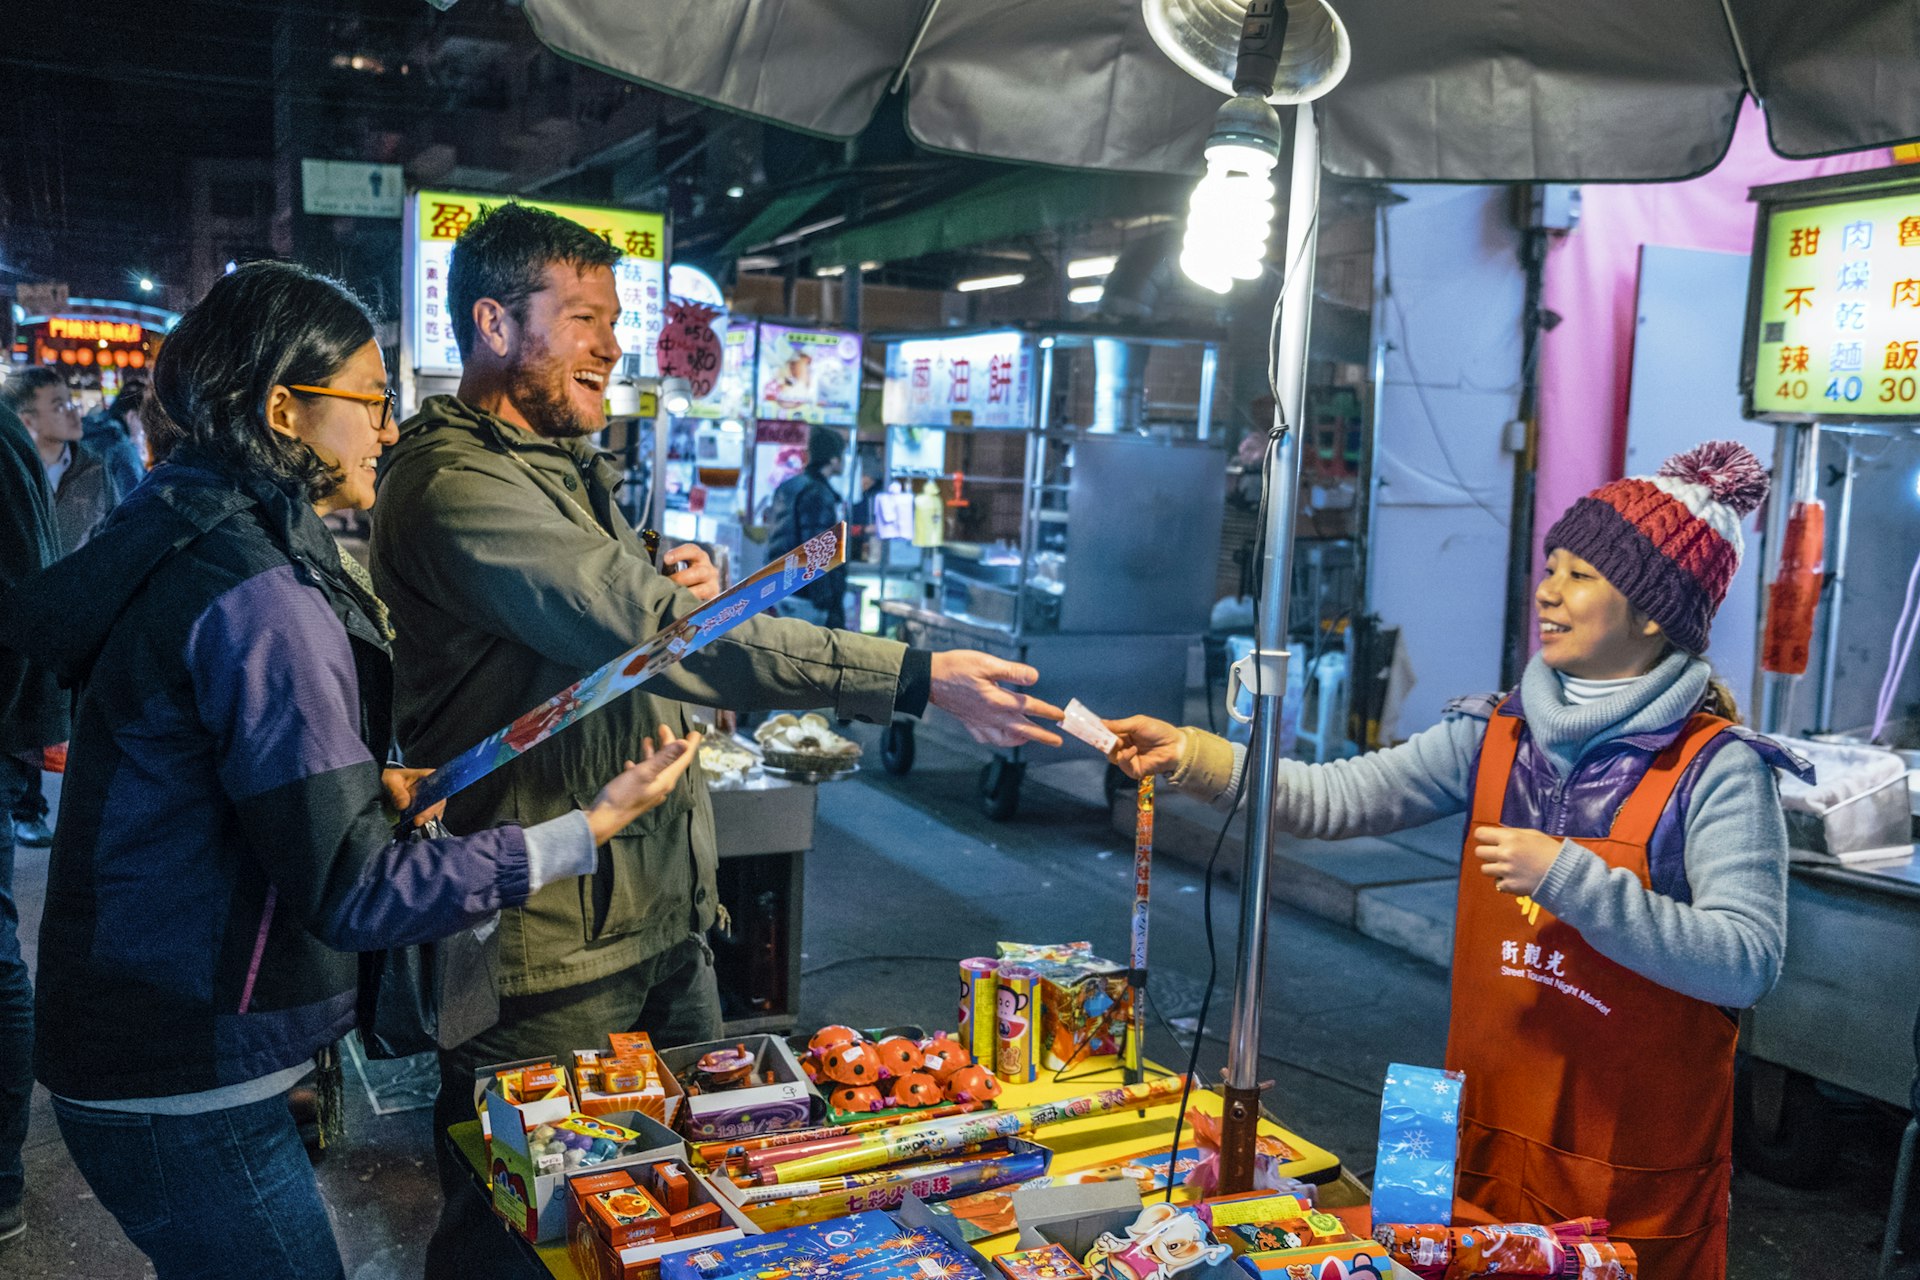 Two people smile as they hand over money to a vendor at a night market stall 